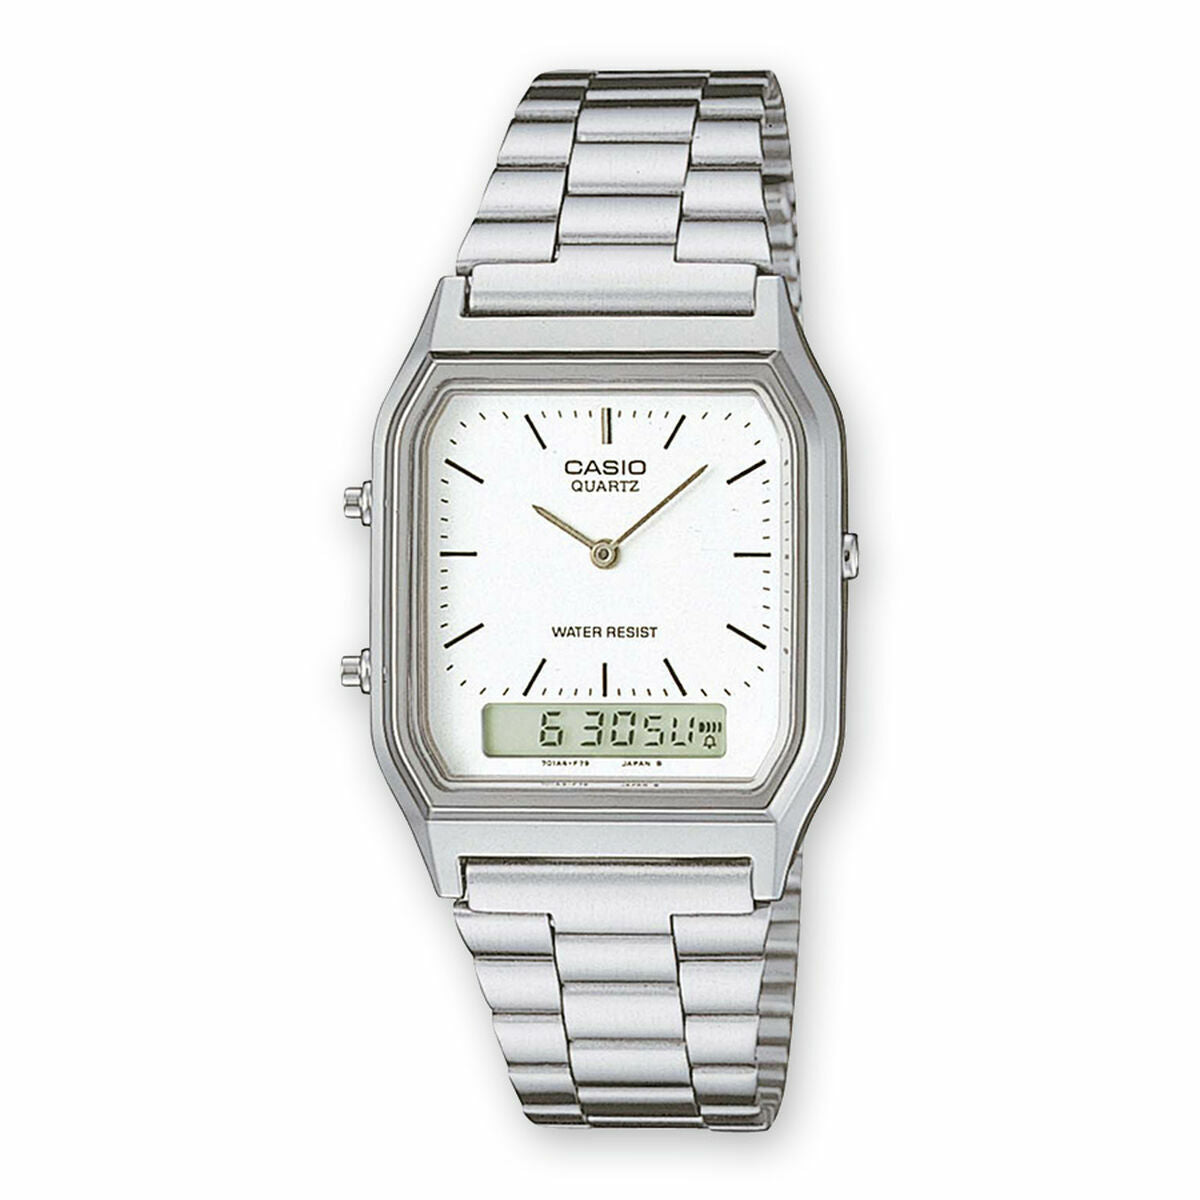 Unisex Watch Casio AQ-230A-7DMQYES, Casio, Watches, Women, unisex-watch-casio-aq-230a-7dmqyes, : Quartz Movement, Brand_Casio, category-reference-2570, category-reference-2635, category-reference-2995, category-reference-t-19667, category-reference-t-19725, Condition_NEW, fashion, gifts for women, original gifts, Price_50 - 100, RiotNook